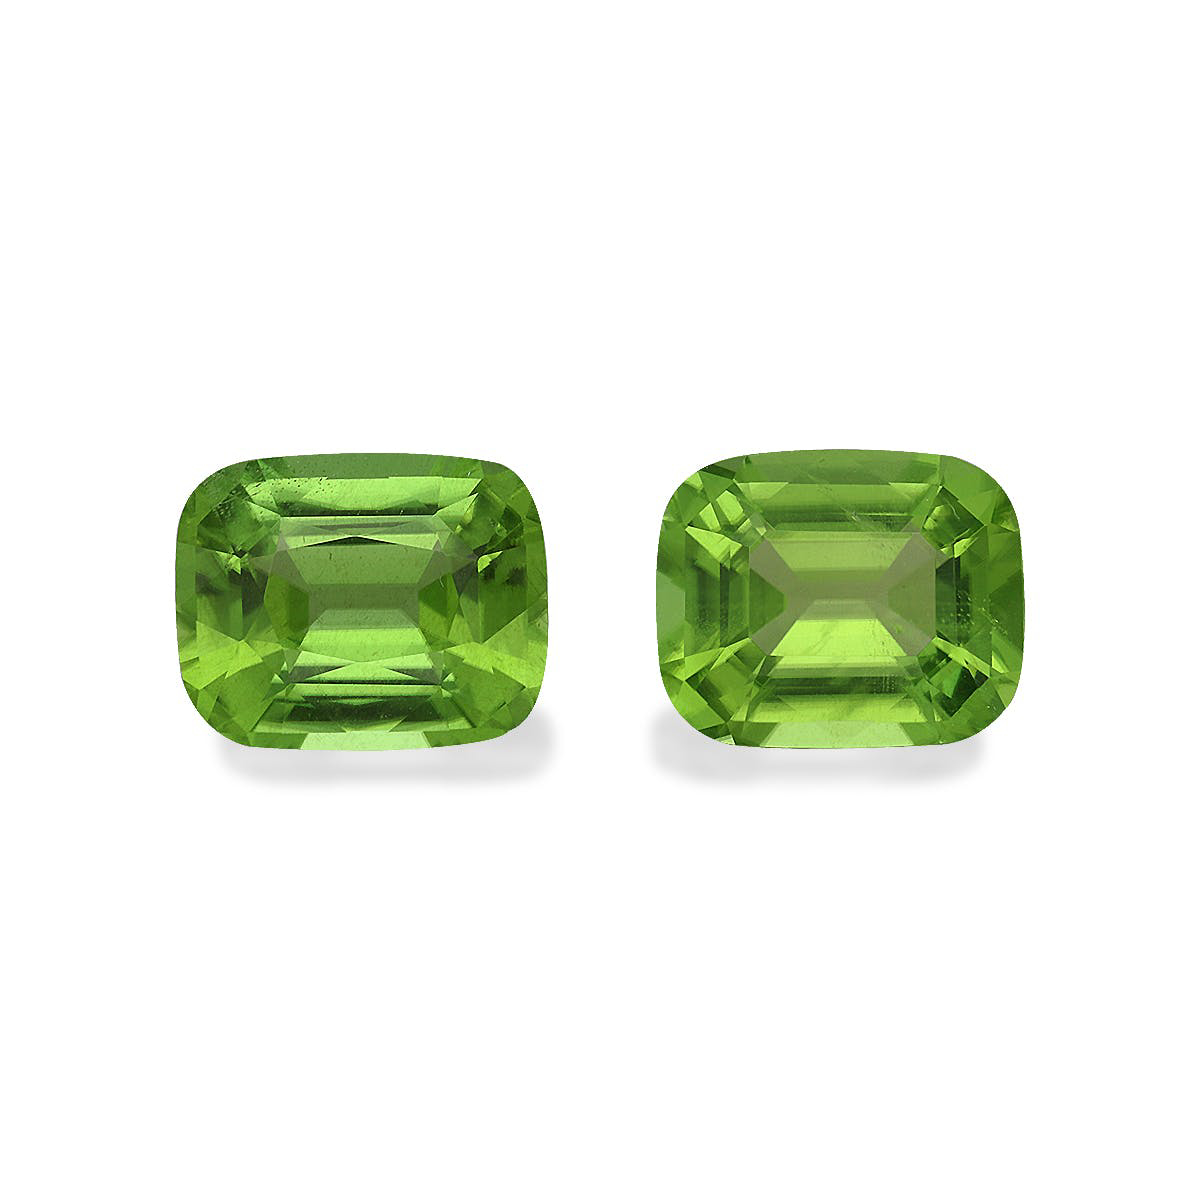 Picture of Pistachio Green Peridot 6.71ct - 10x8mm Pair (PD0157)